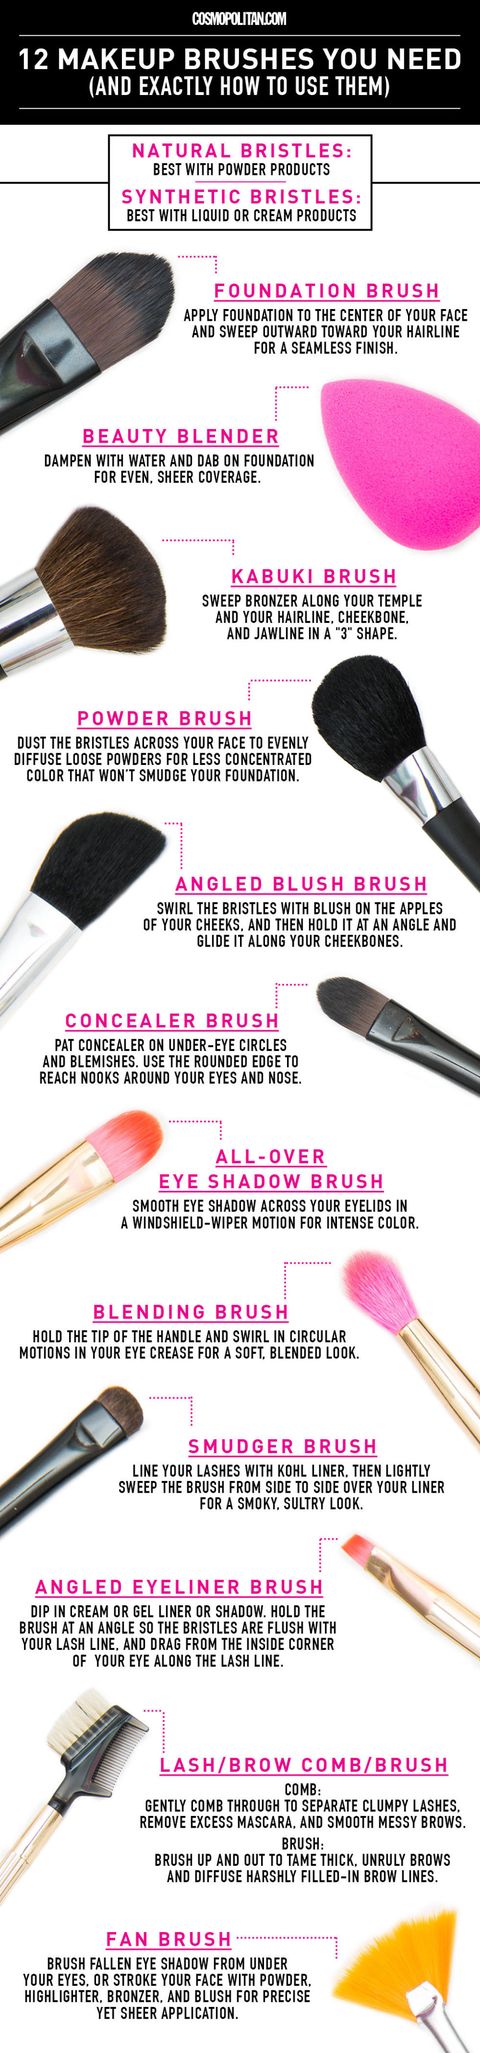 12 Makeup Brushes You Need And How To Use Them Build Your Own Makeup 